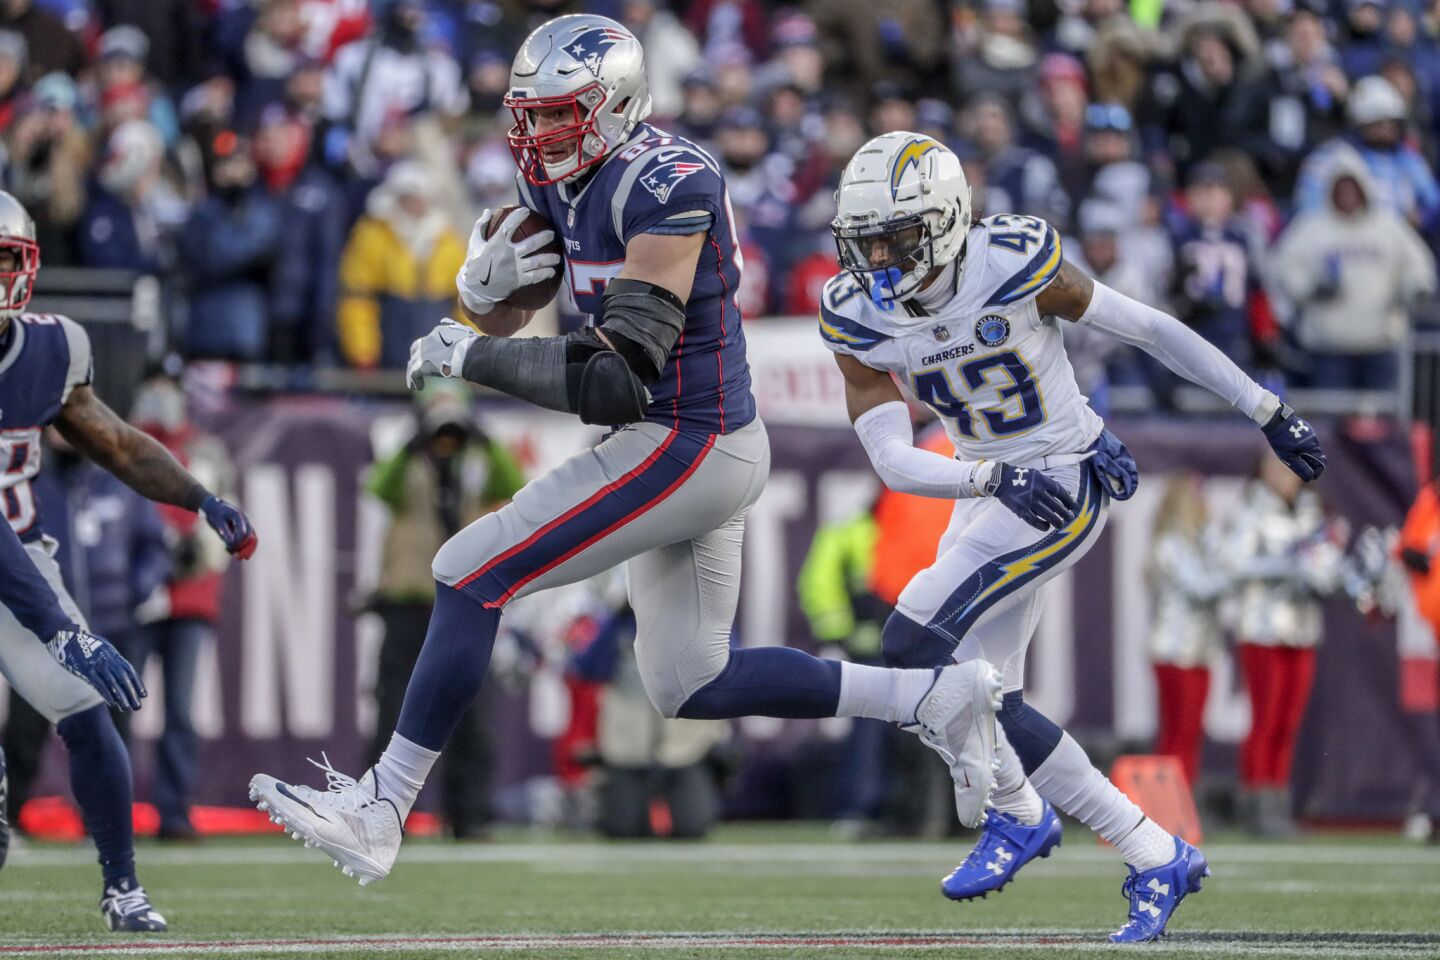 New England Patriots tight end Rob Gronkowski sprints past Chargers cornerback Michael Davis for a 25-yard gain in the third quarter in the NFL AFC Divisional Playoff at Gillette Stadium.